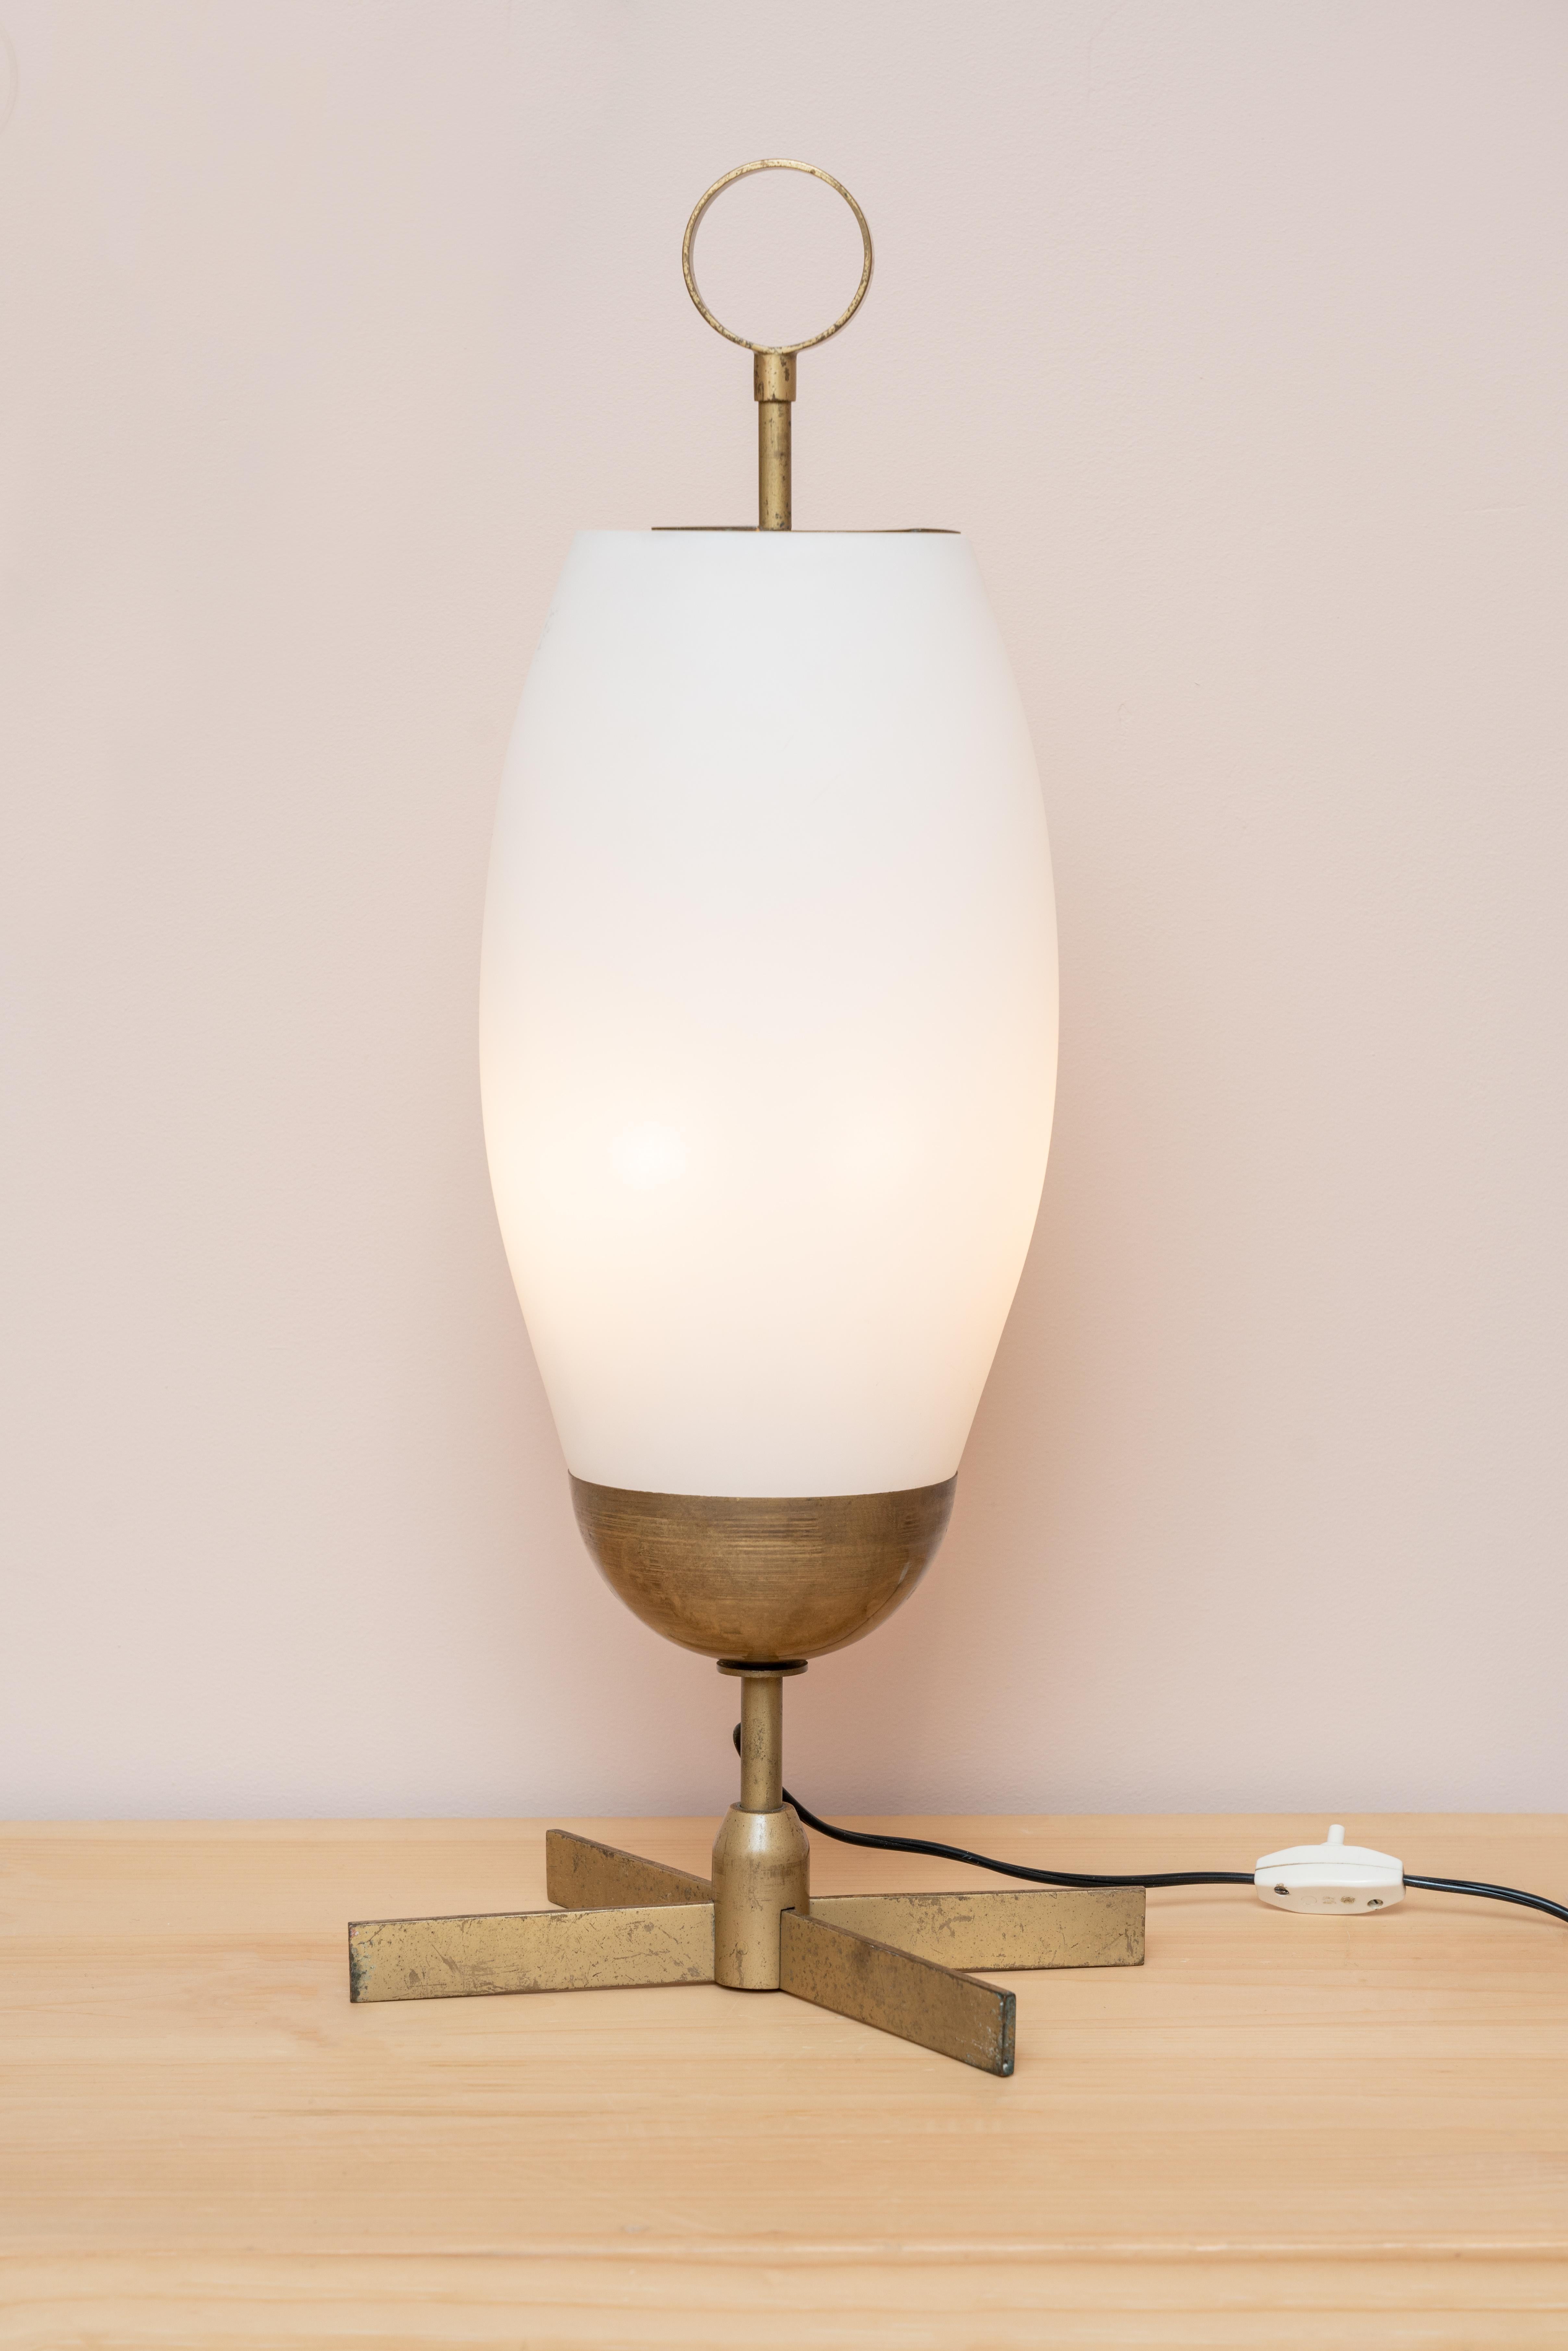 An Italian Table Lamp that effortlessly combines vintage charm and timeless elegance. Crafted in the 1950s, this lamp showcases exquisite craftsmanship with its brass construction and frosted glass shade.